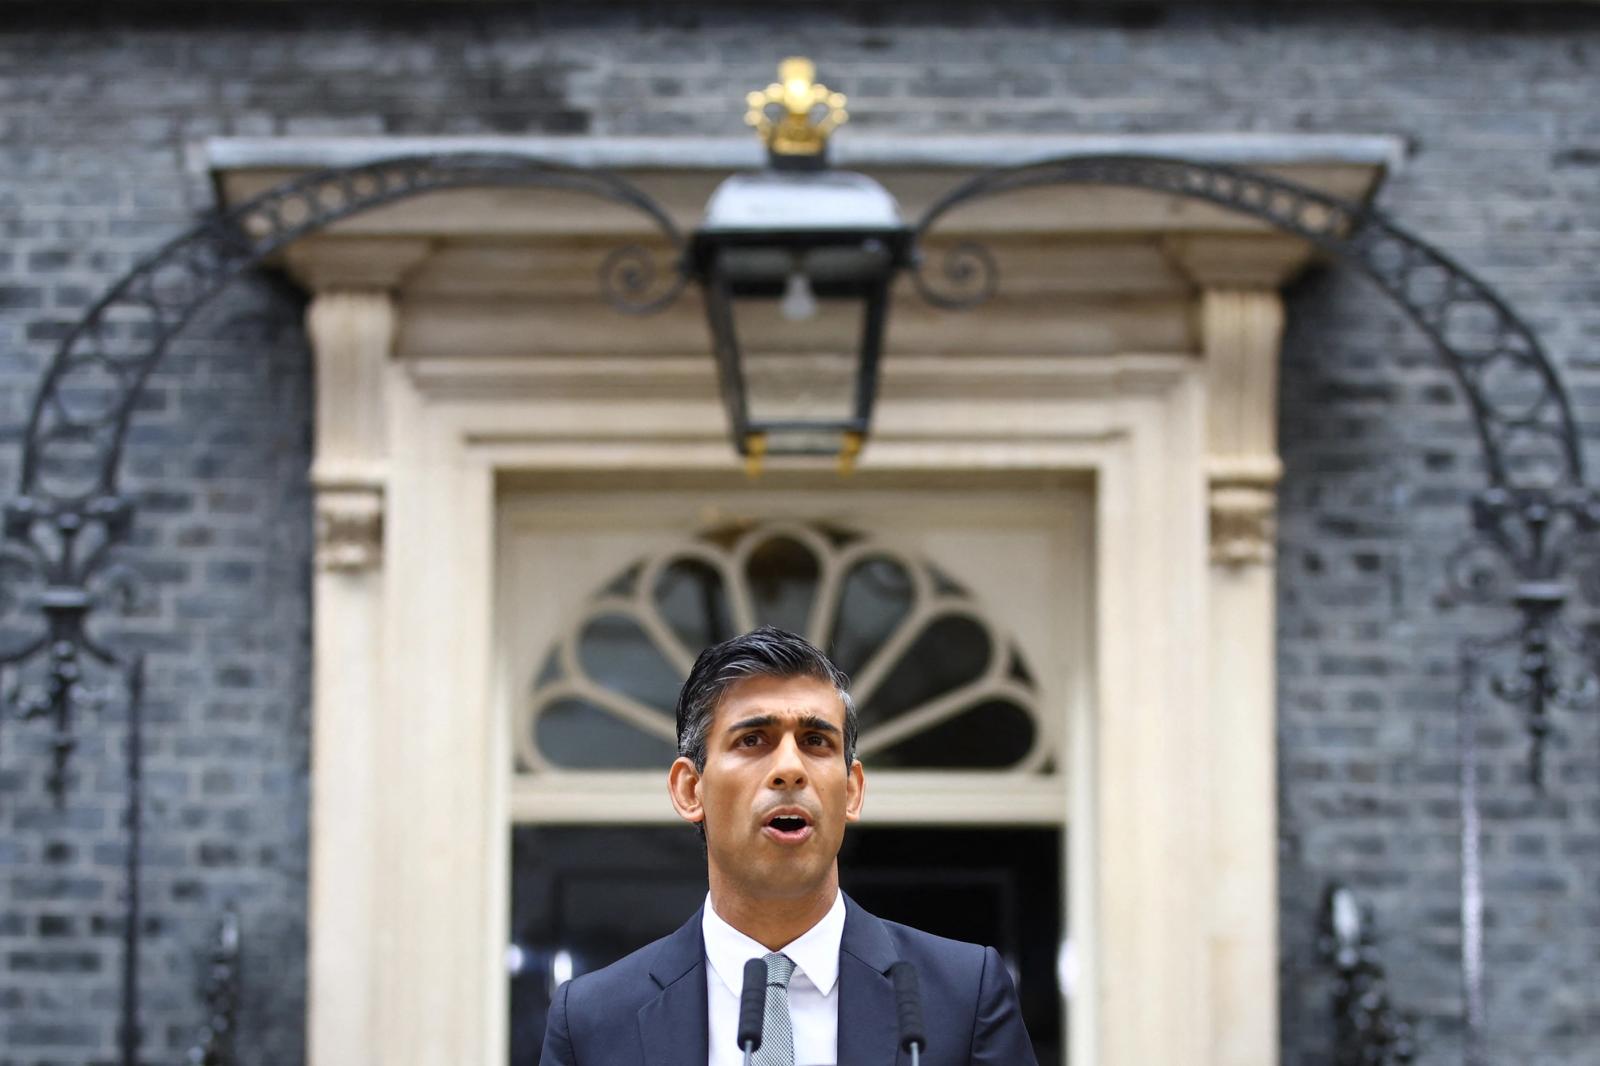 Britain's new Prime Minister Rishi Sunak delivers a speech outside Number 10 Downing Street, in London, Britain, October 25, 2022.